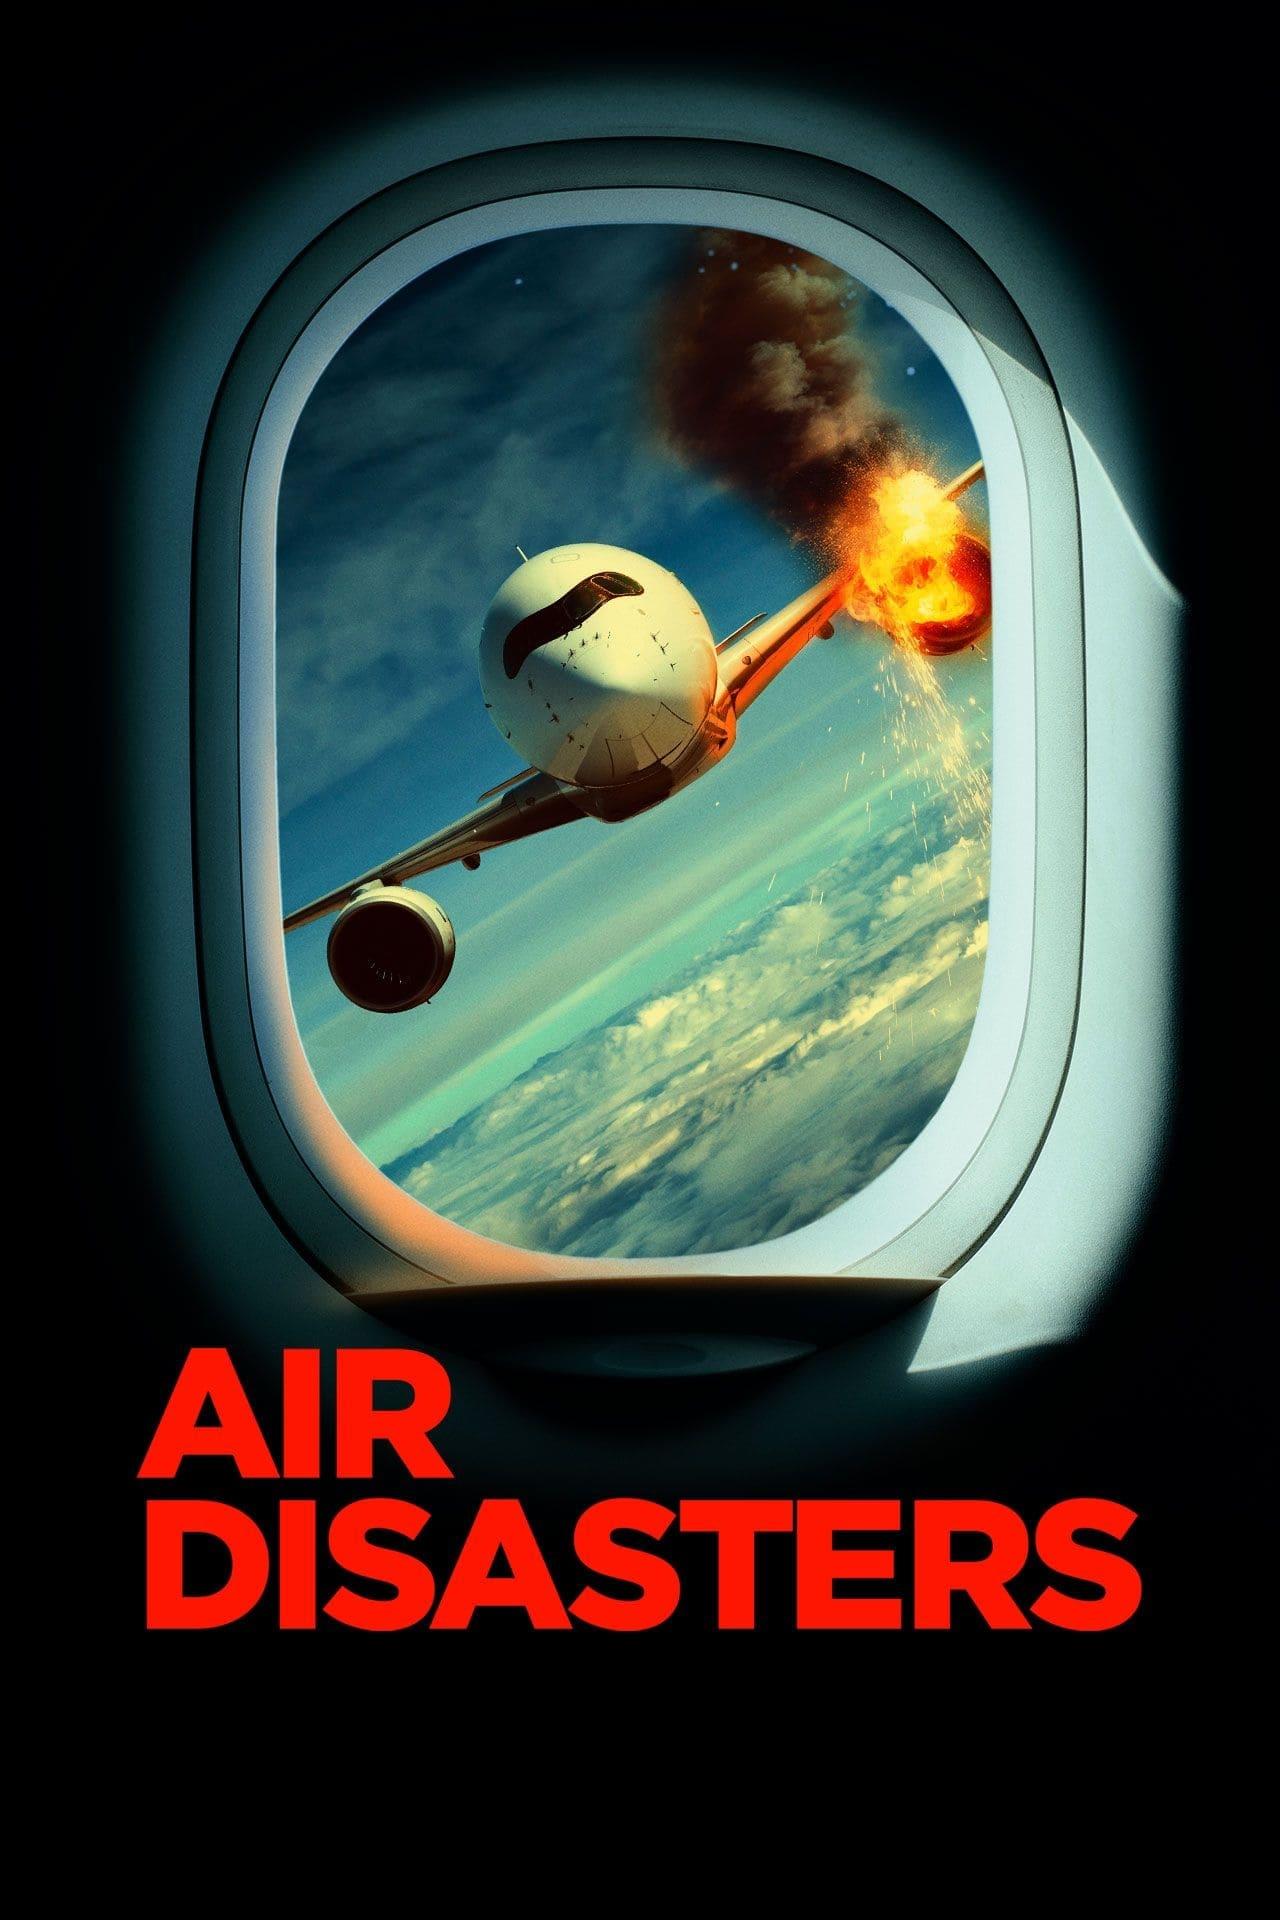 Air Disasters poster